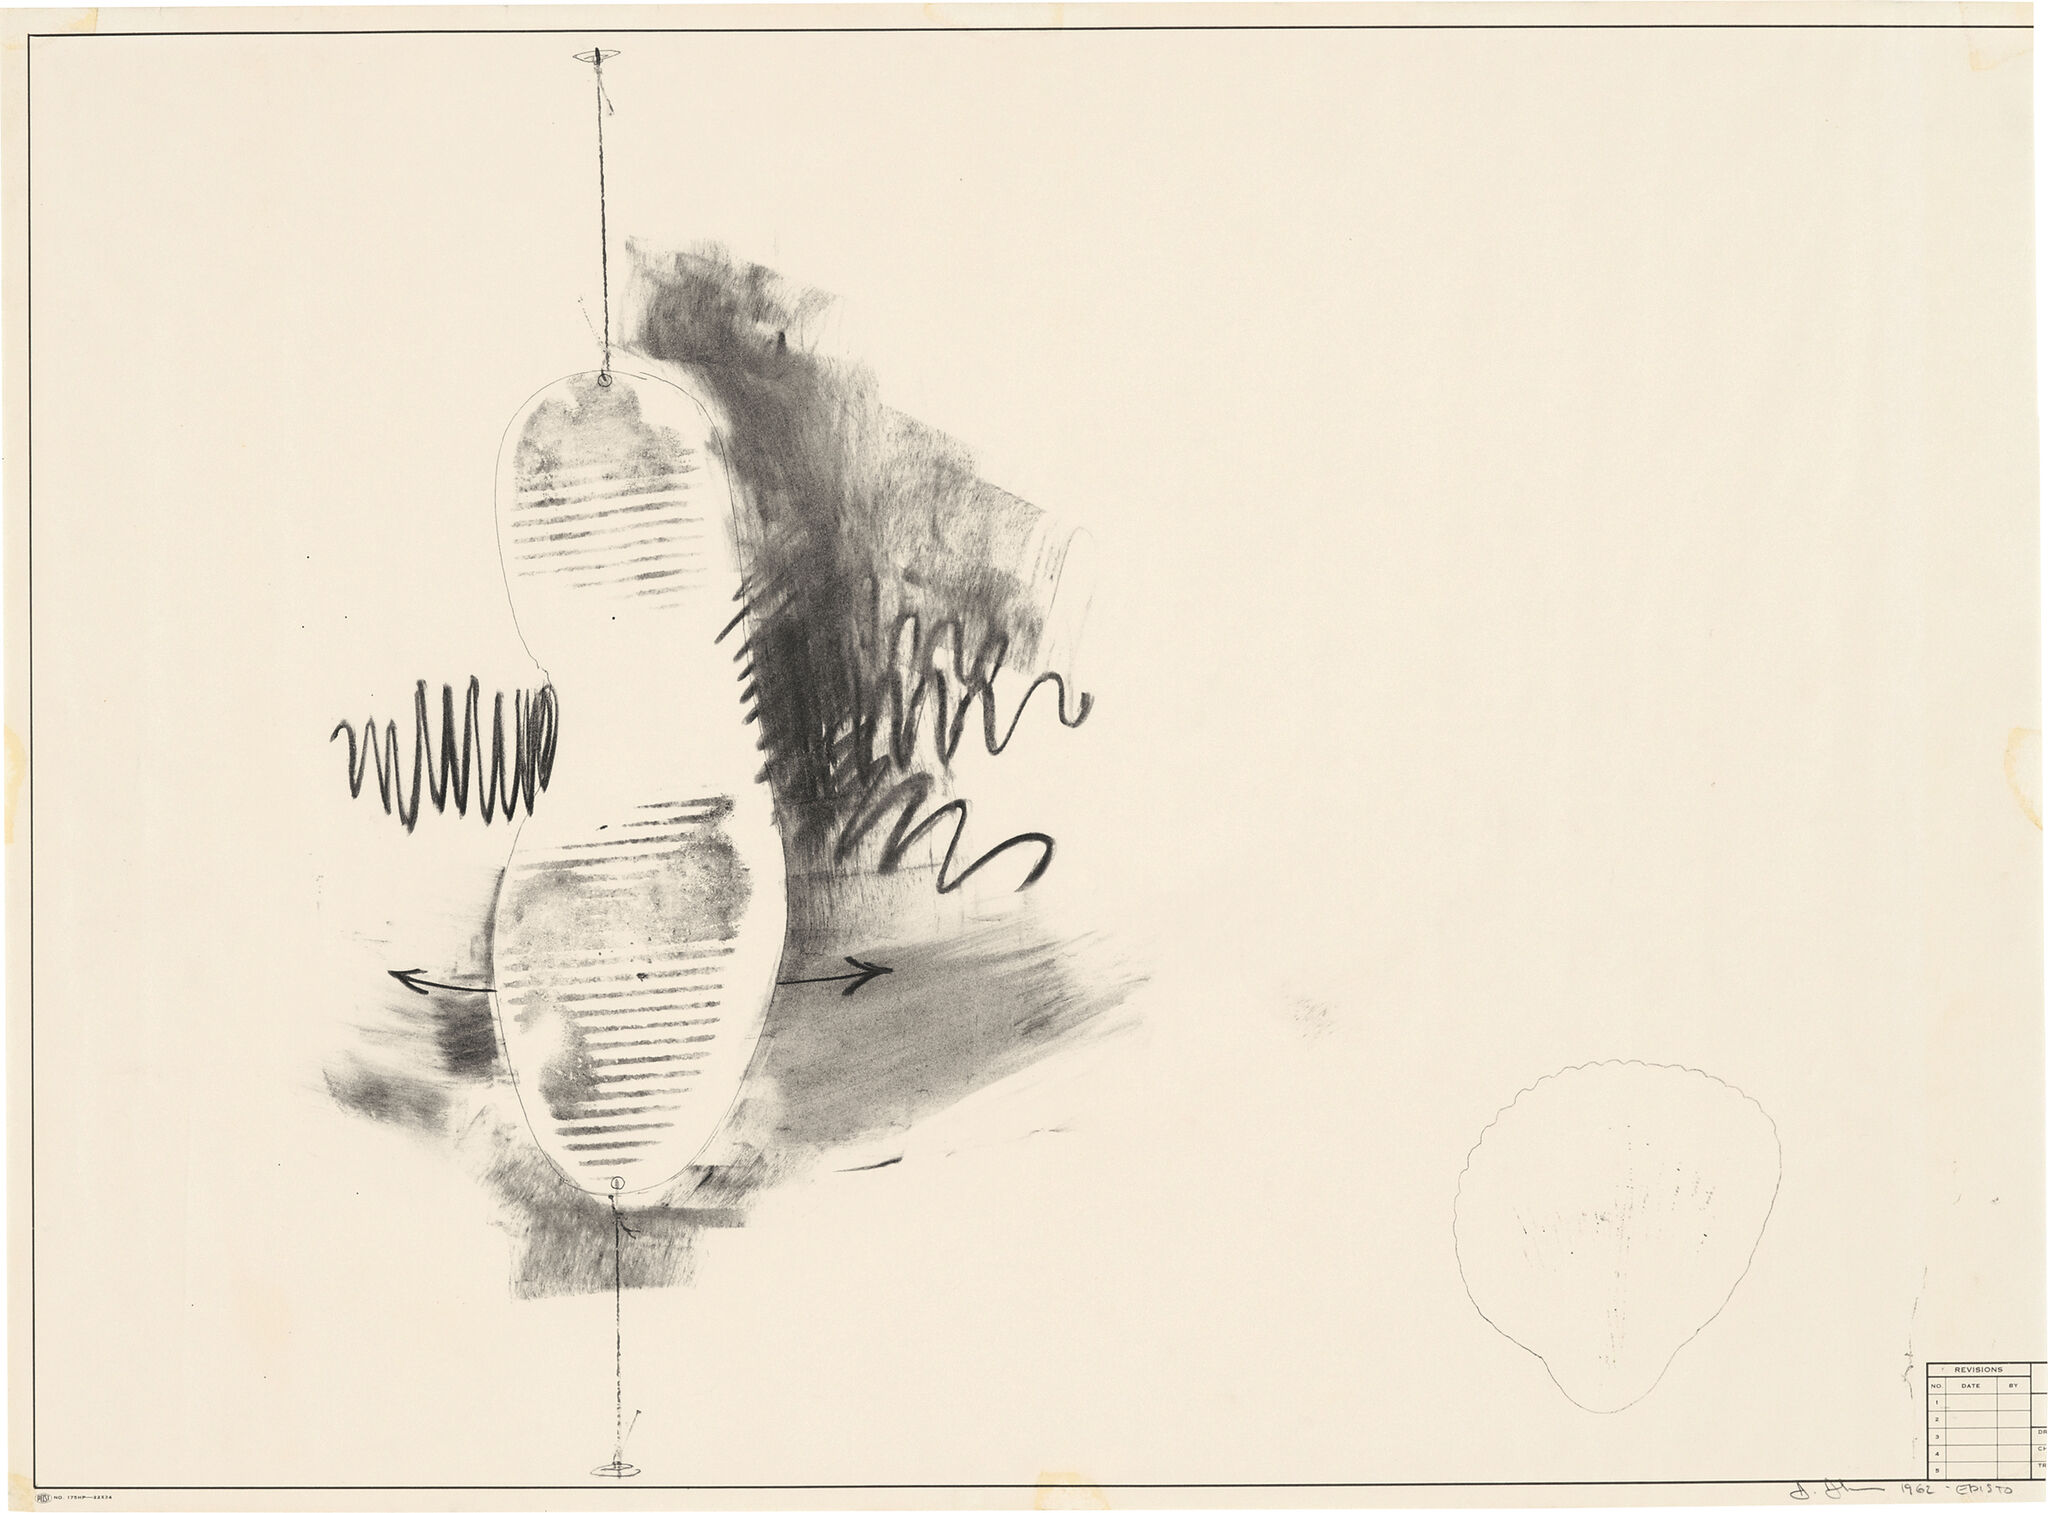 Sketch of an upside-down shoe sole, suspended by a vertical line on the left-hand side of the rectangular composition, and surrounded by shadowy charcoal smudges and squiggles, with arrows arcing out to the left and right of the show, indicating motion.